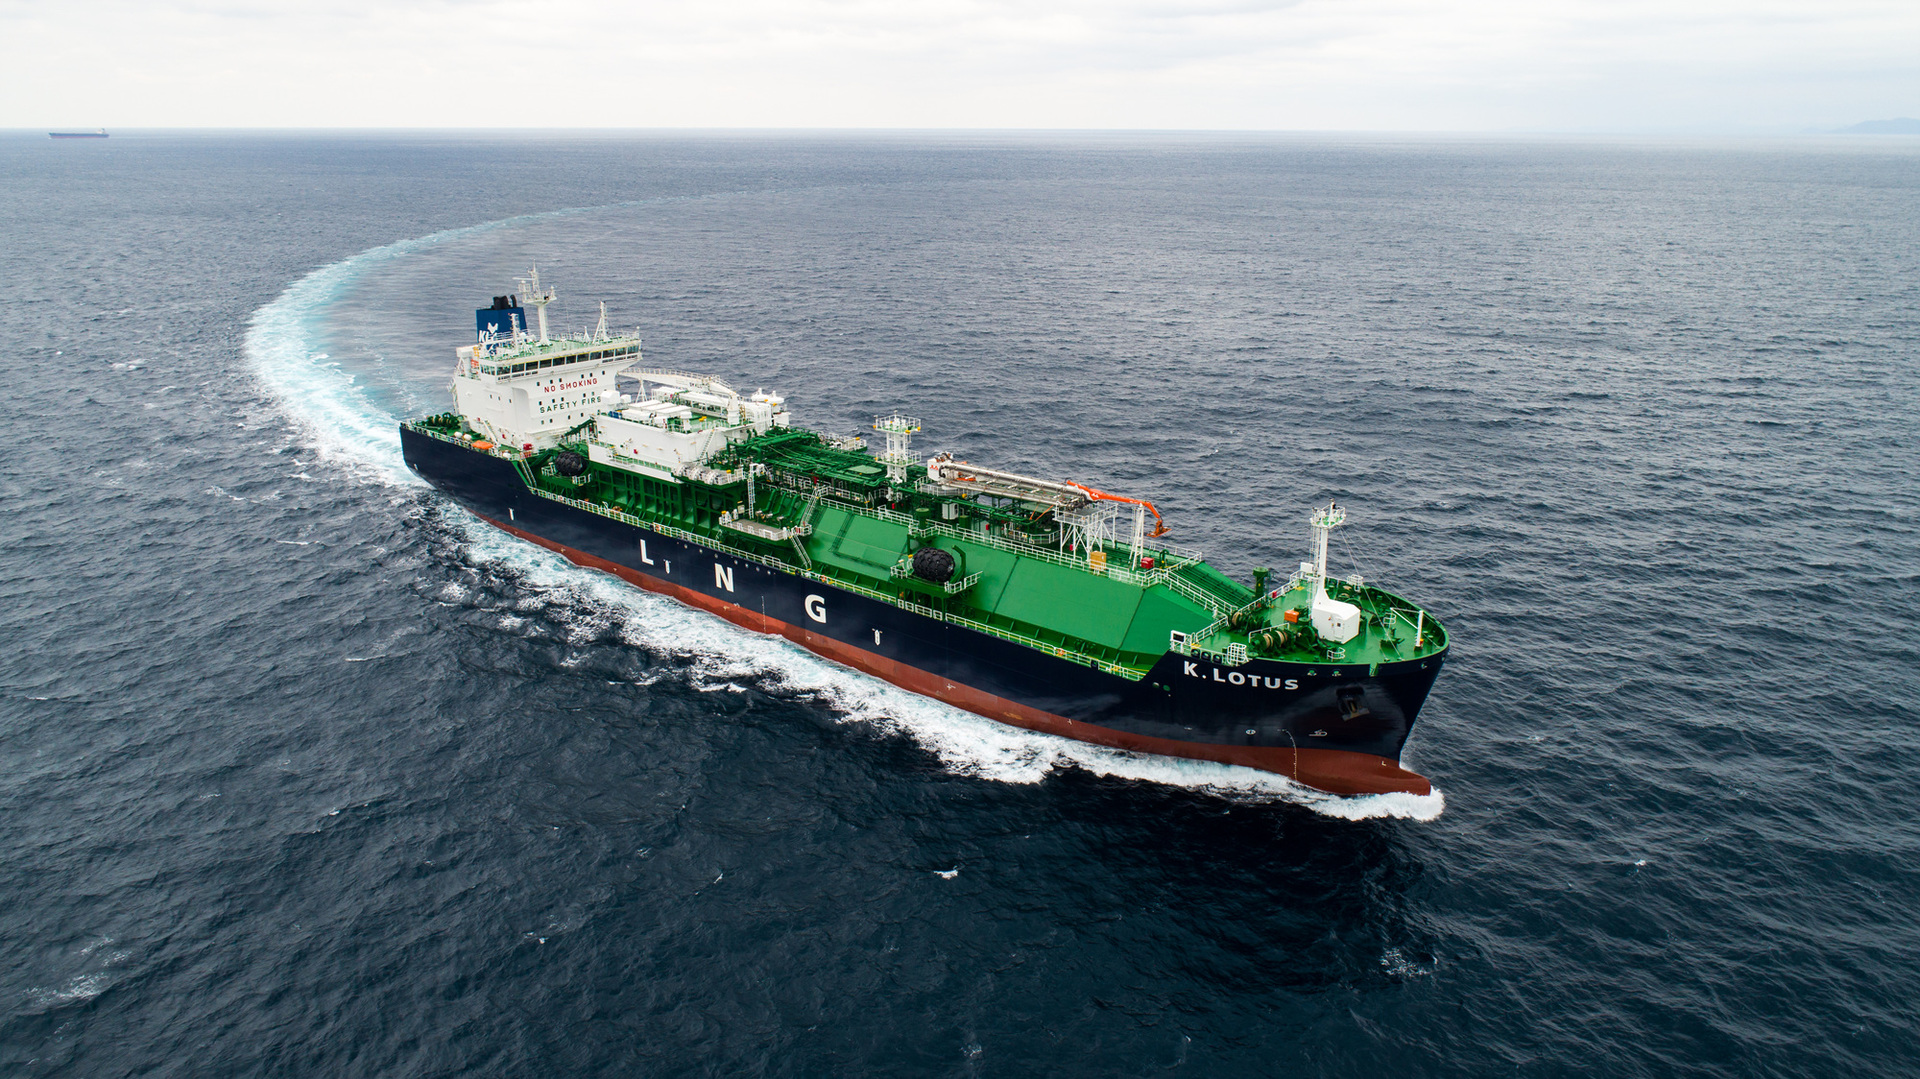 New LNG bunkering vessel to be deployed in Europe soon